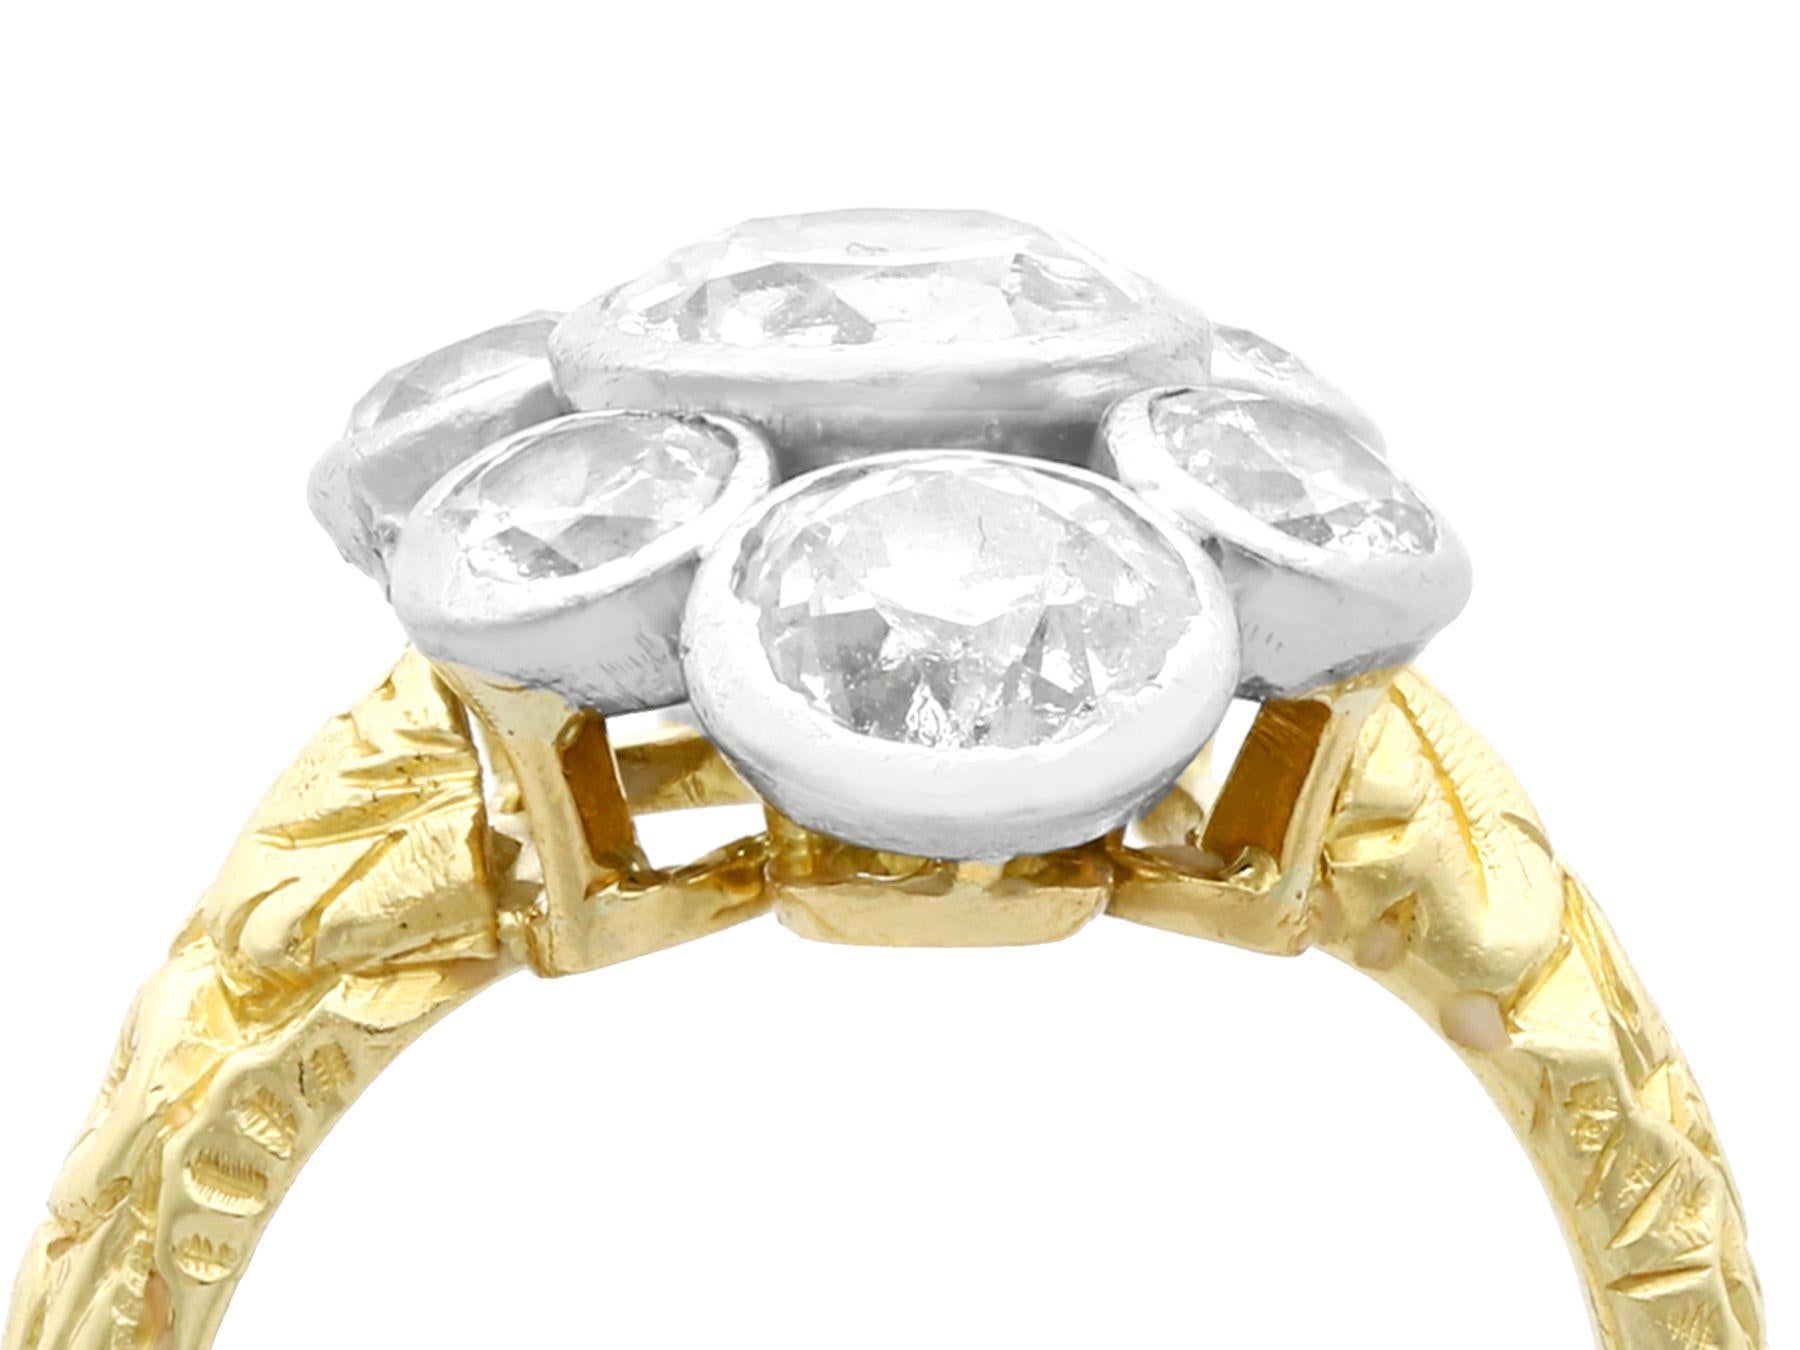 A stunning antique and vintage 3.54 carat diamond and 18 karat yellow gold cluster ring, with a platinum setting; part of our diverse diamond jewelry and estate jewelry collections.

This stunning, fine and impressive vintage diamond ring has been